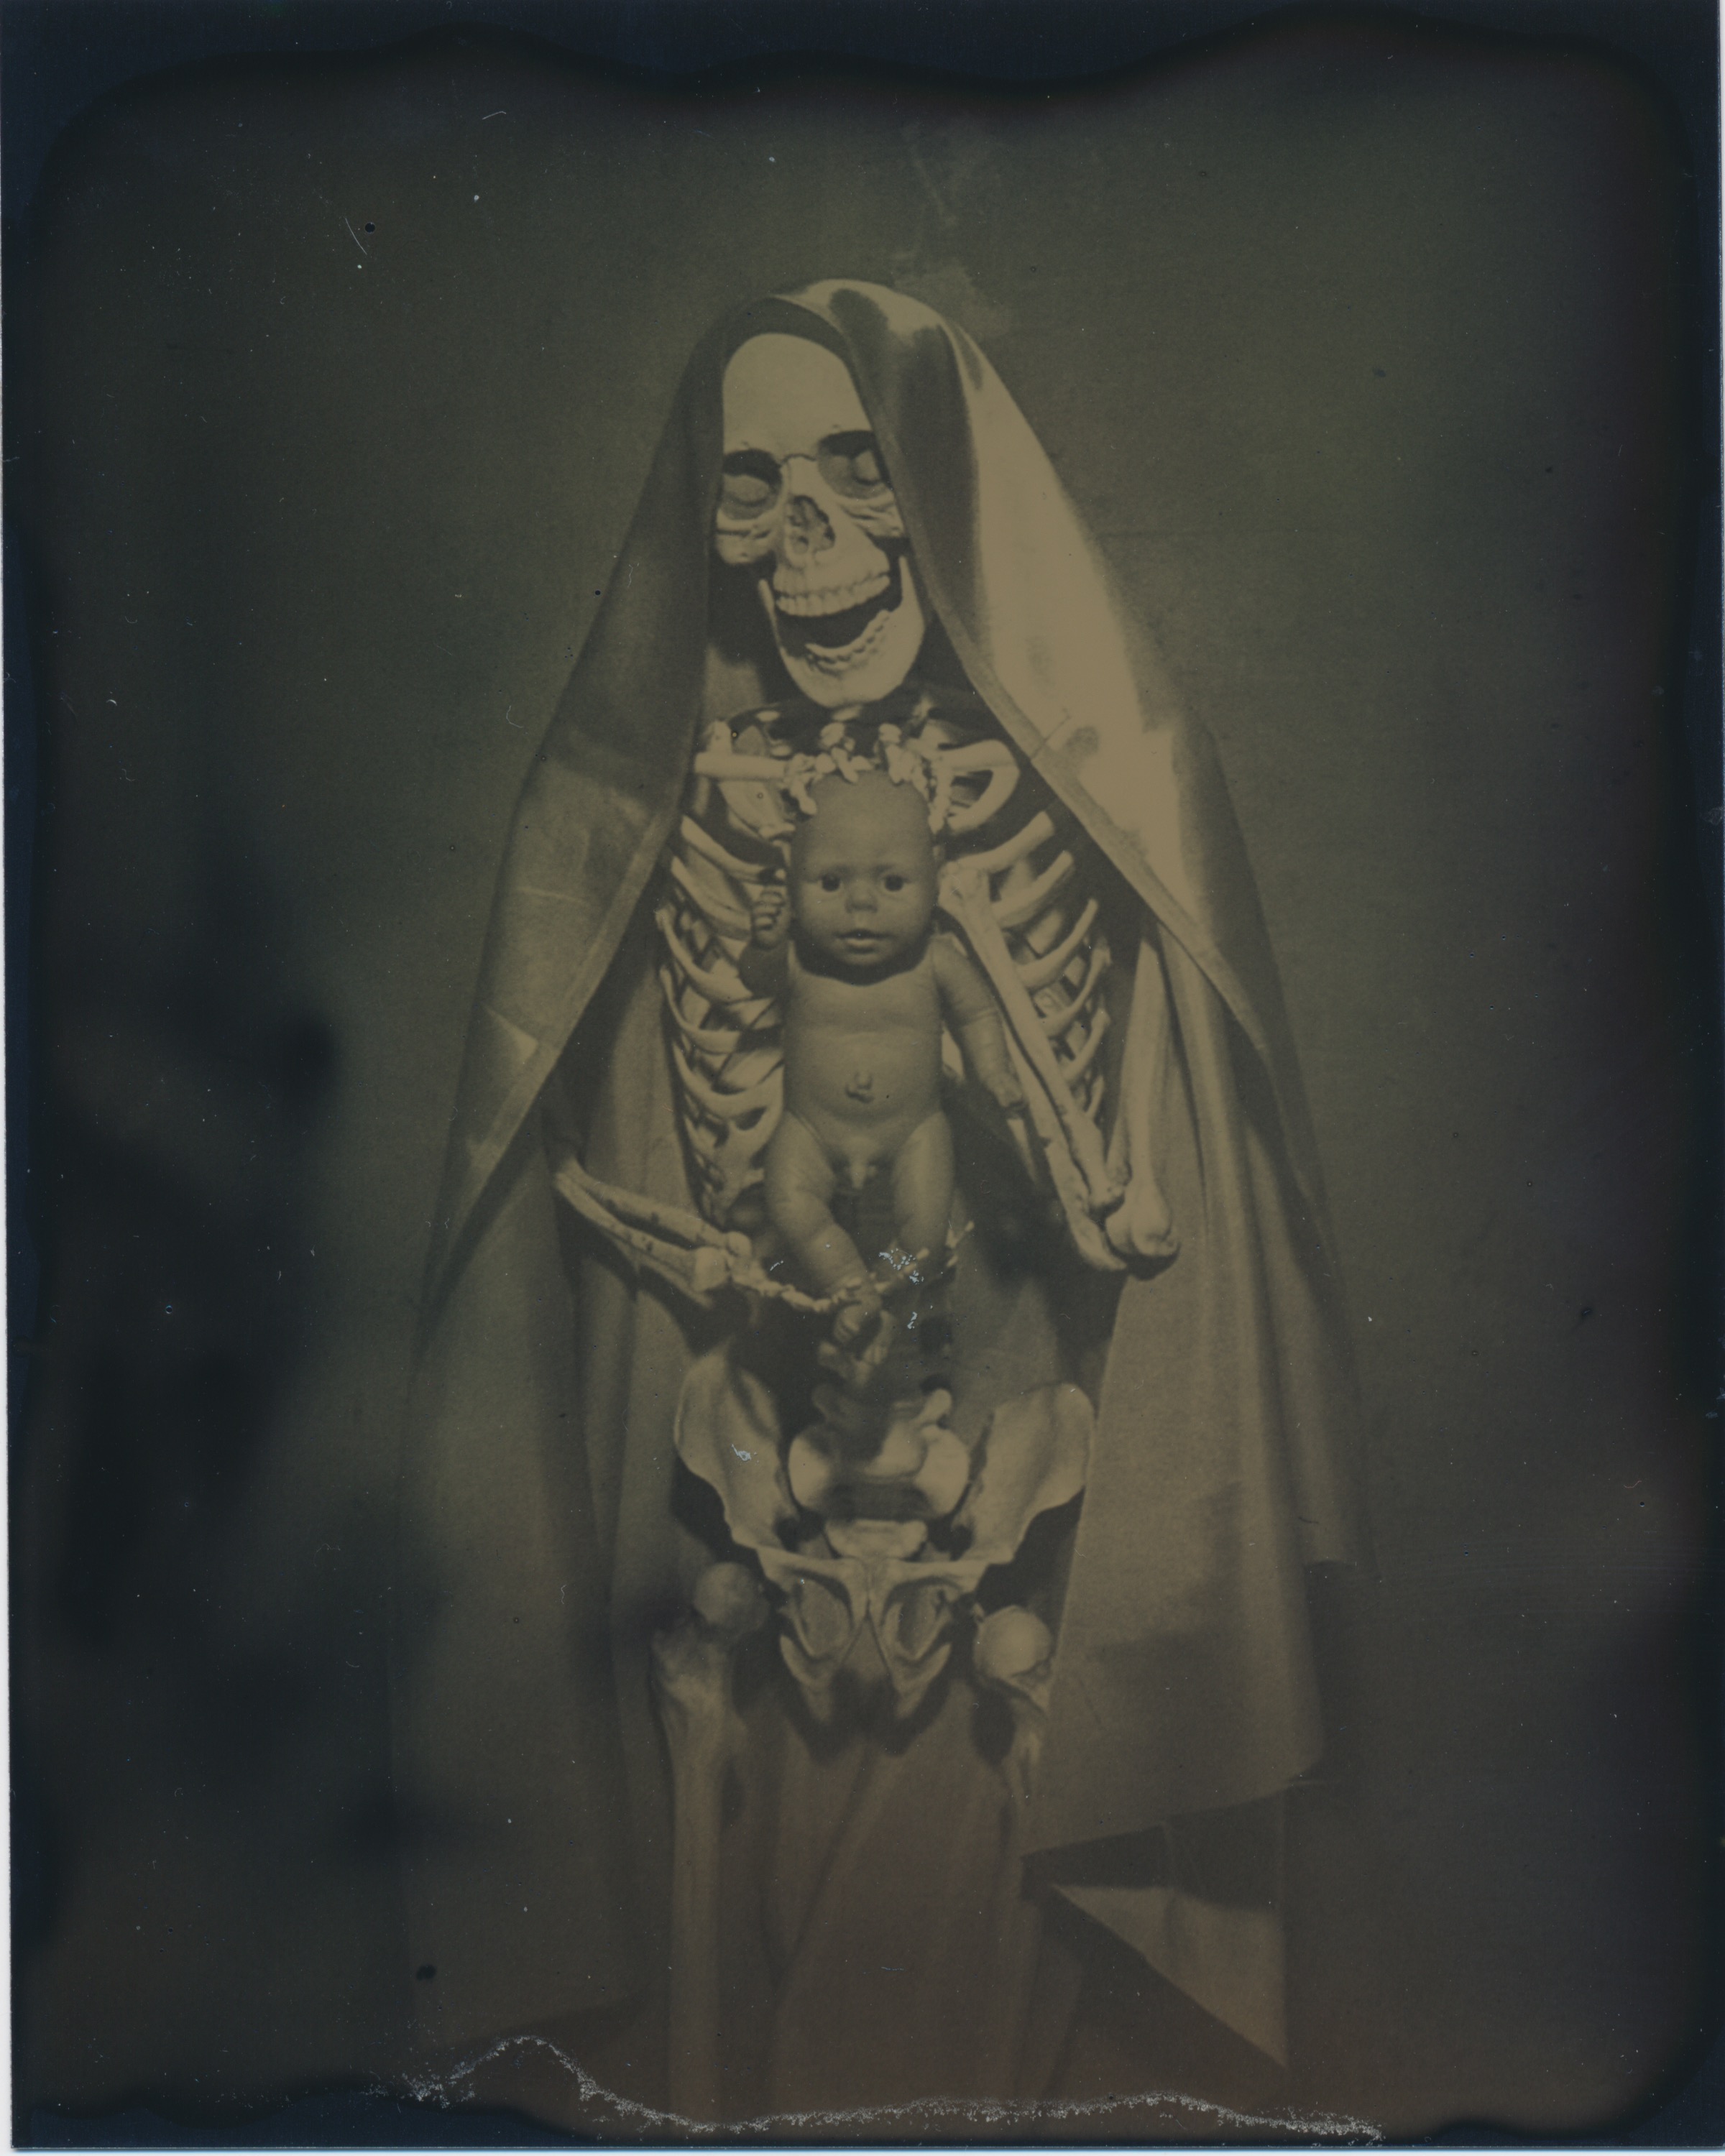   After Madonna and Child   2015  Tintype  4x5 